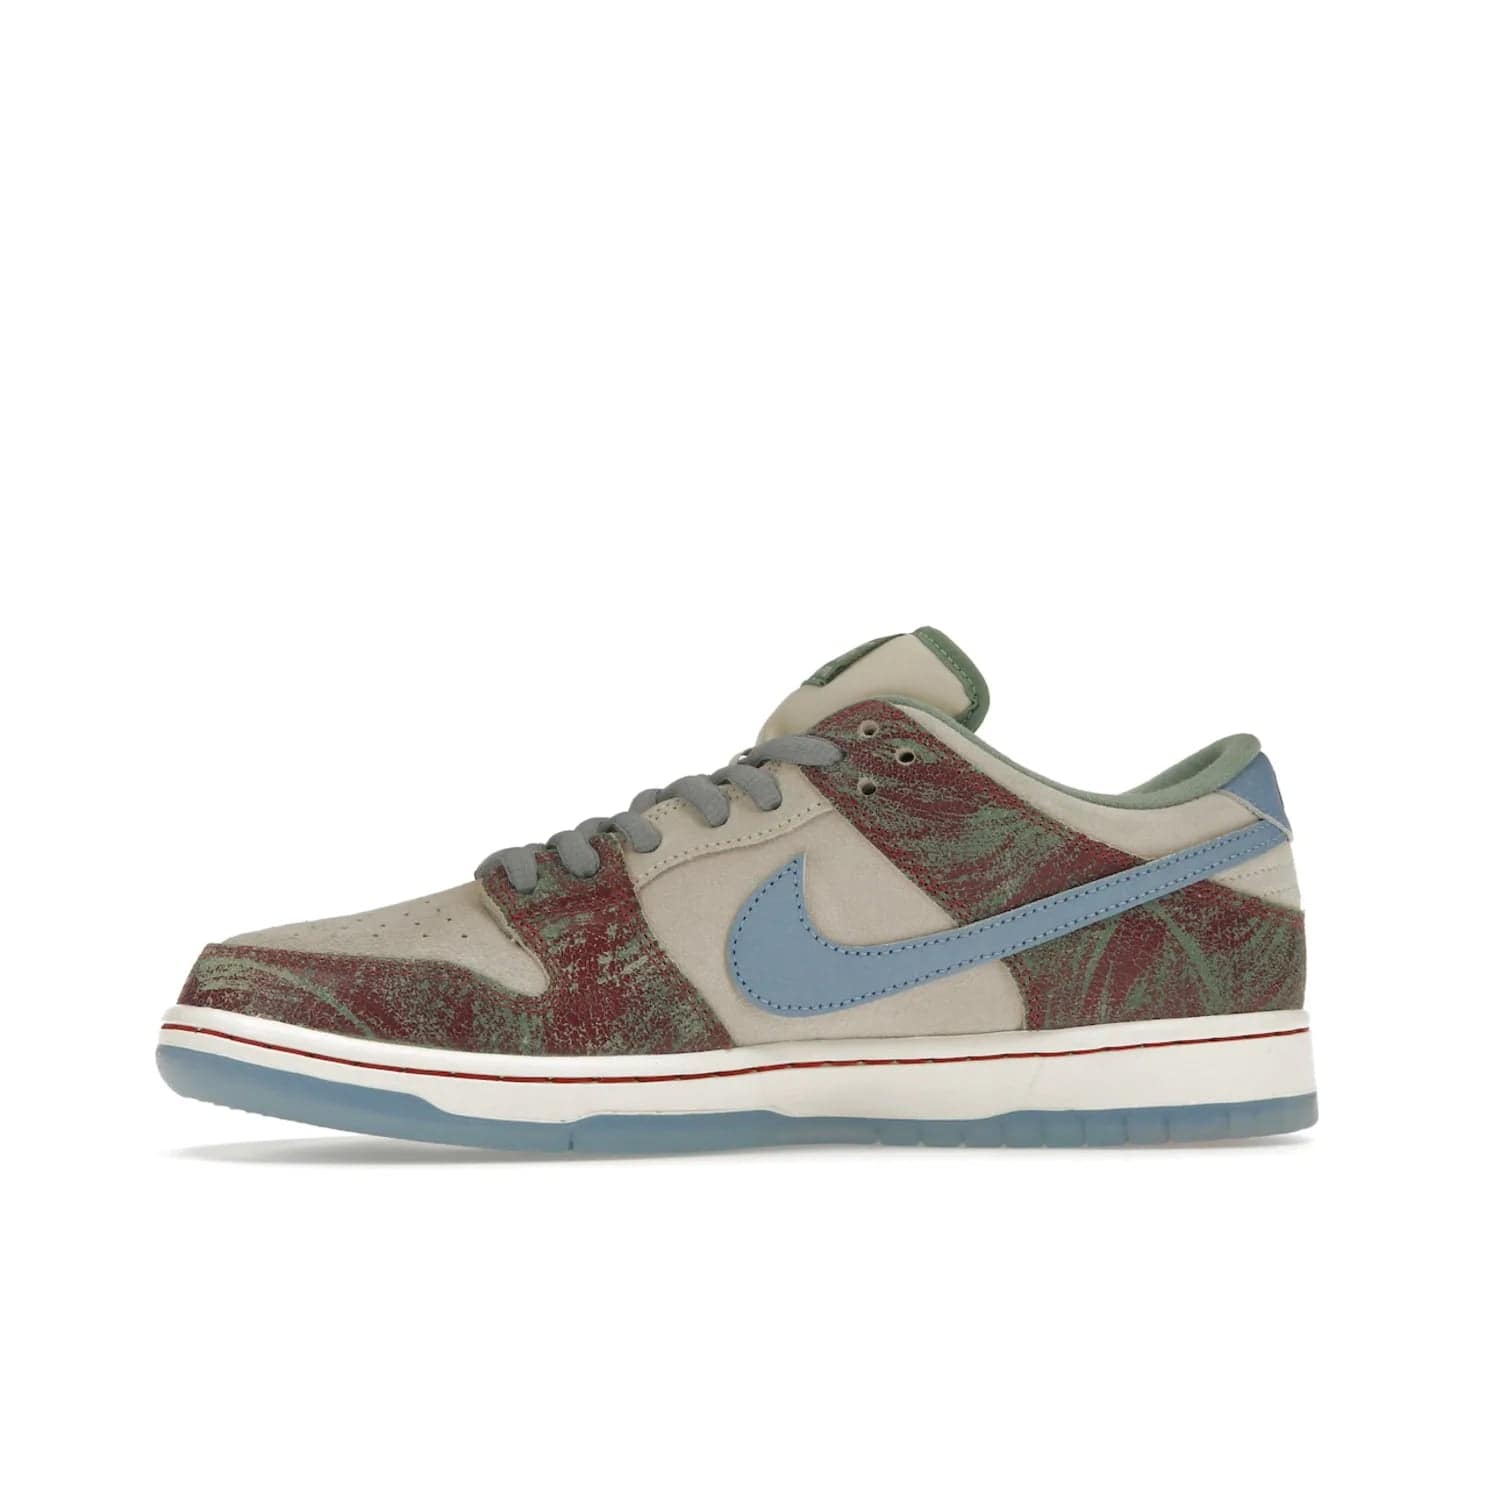 Nike SB Dunk Low Crenshaw Skate Club - Image 18 - Only at www.BallersClubKickz.com - Introducing the Nike SB Dunk Low Crenshaw Skate Club! Classic skate shoes with Sail and Light Blue upper, Cedar accents, padded collars and superior grip for comfortable, stable performance and style. Ideal for any skate session.